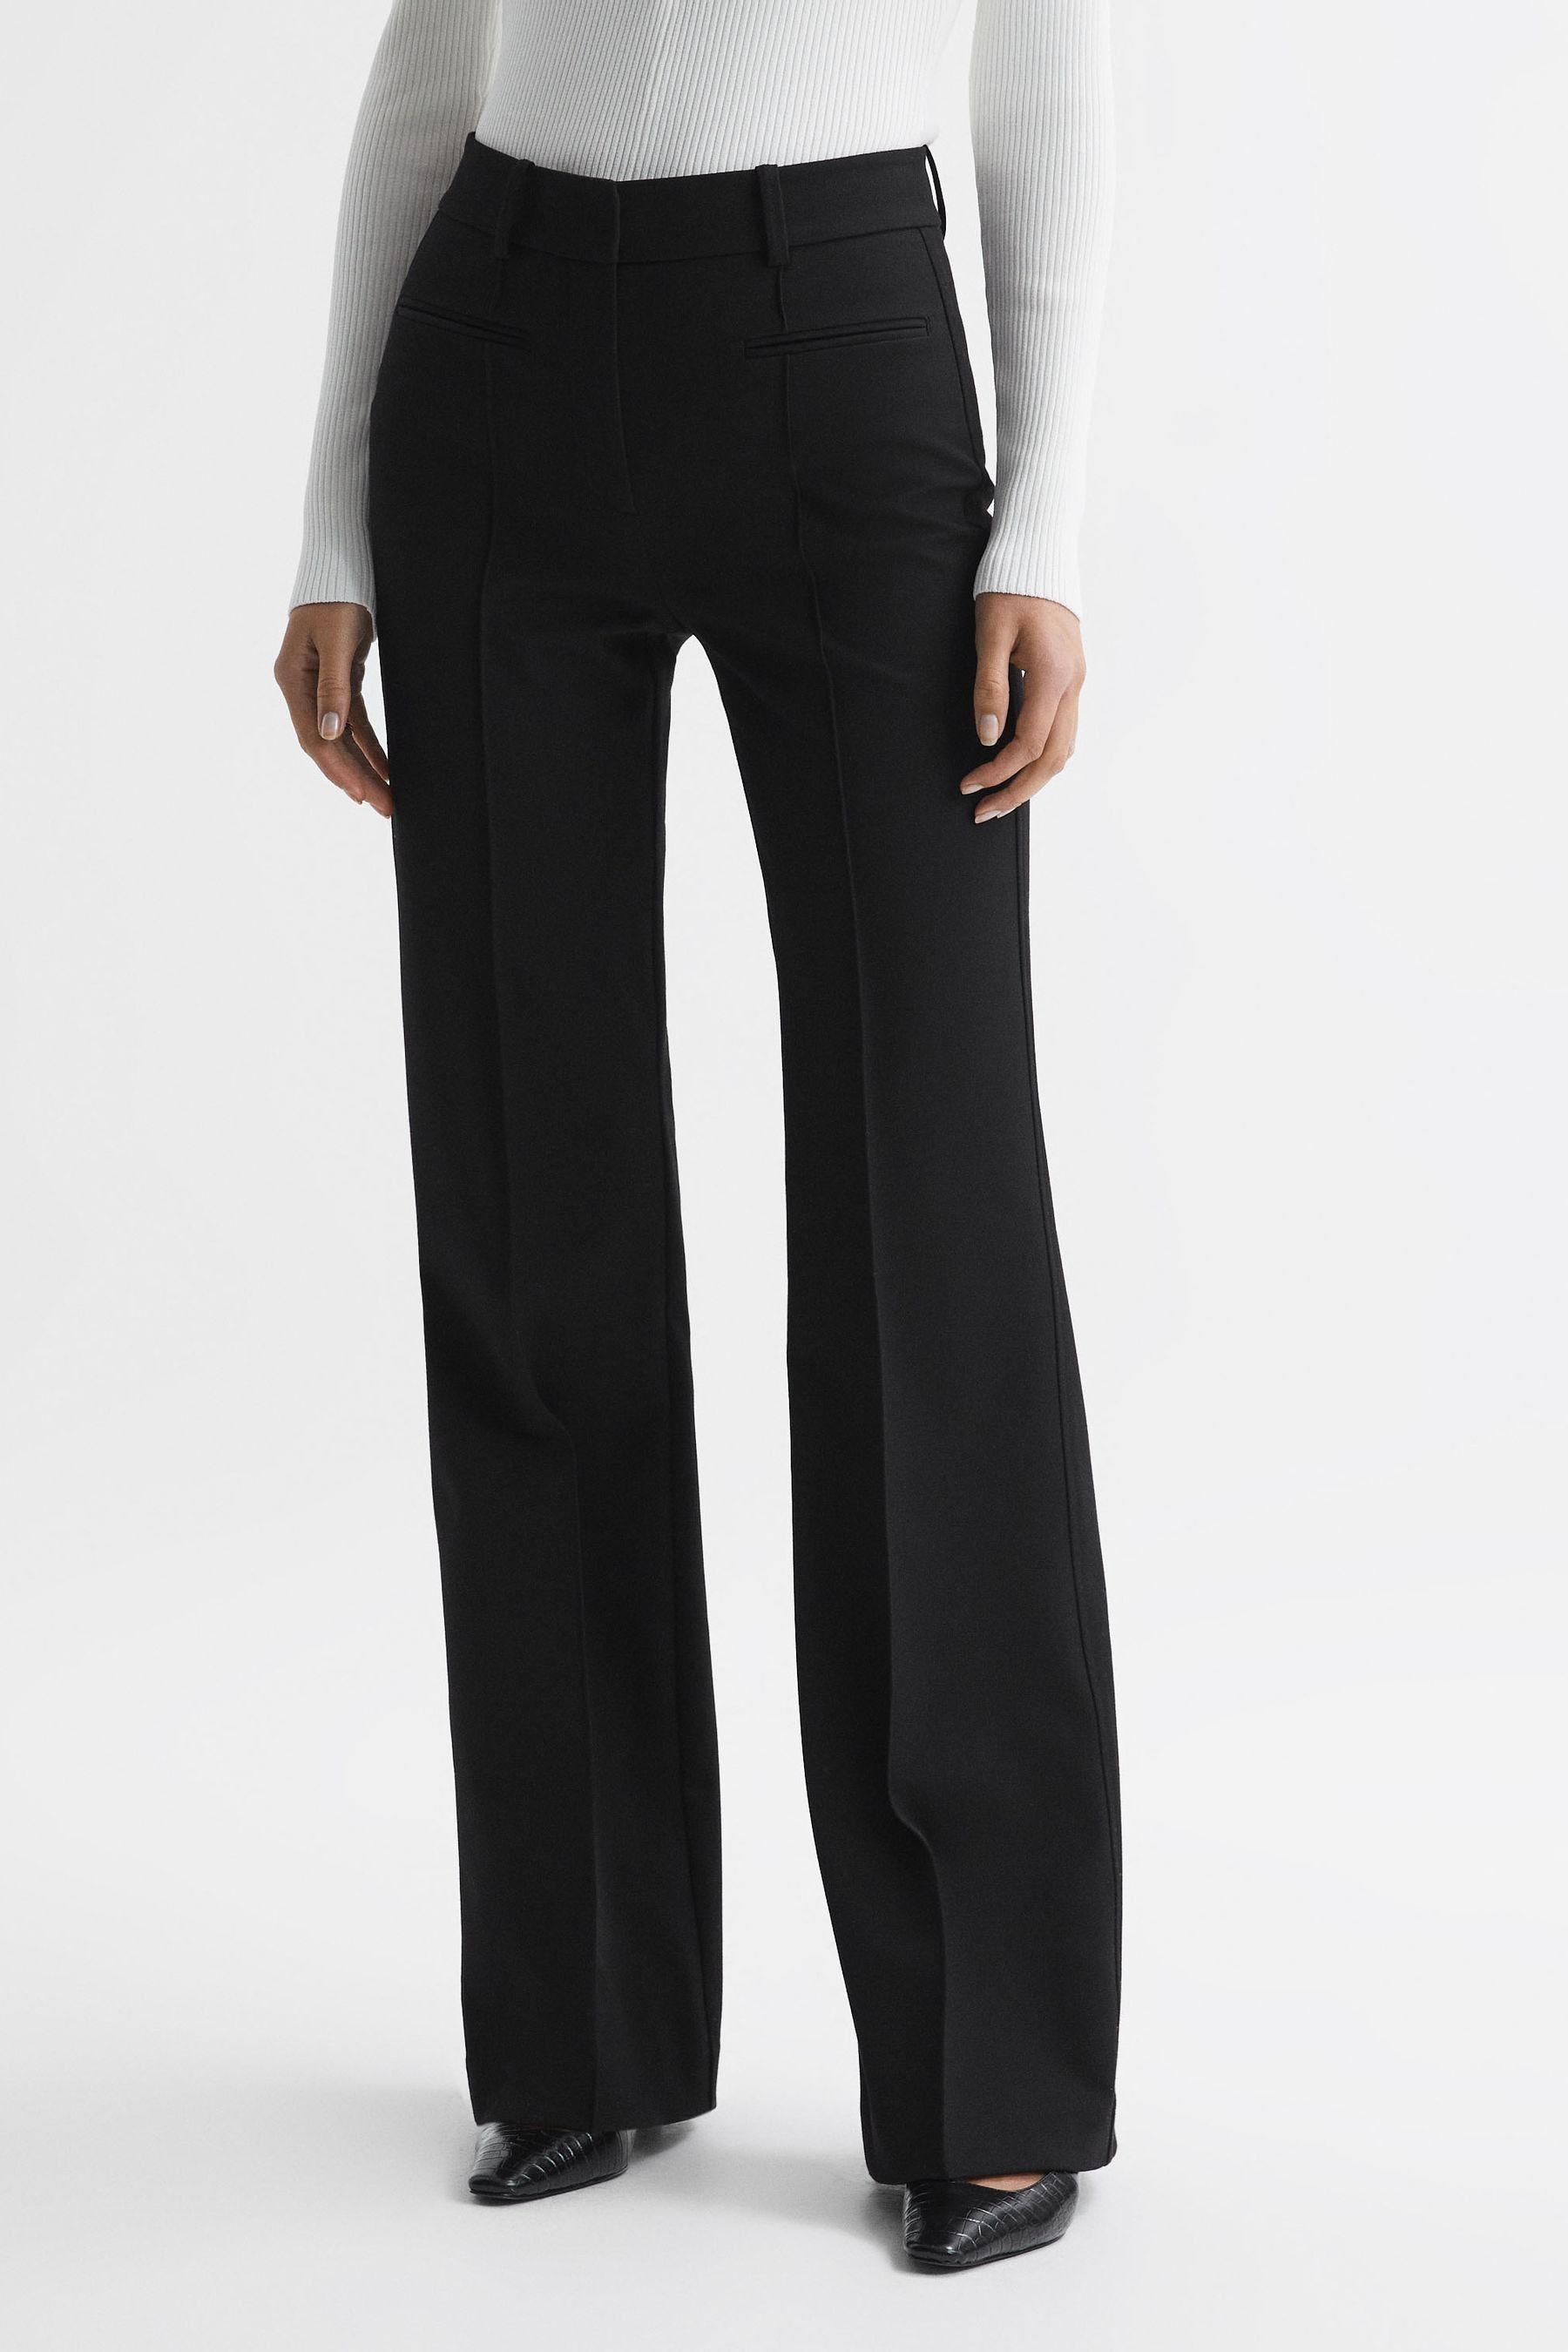 Reiss Claude - Black High Rise Flared Trousers, Uk 14 R | Lyst